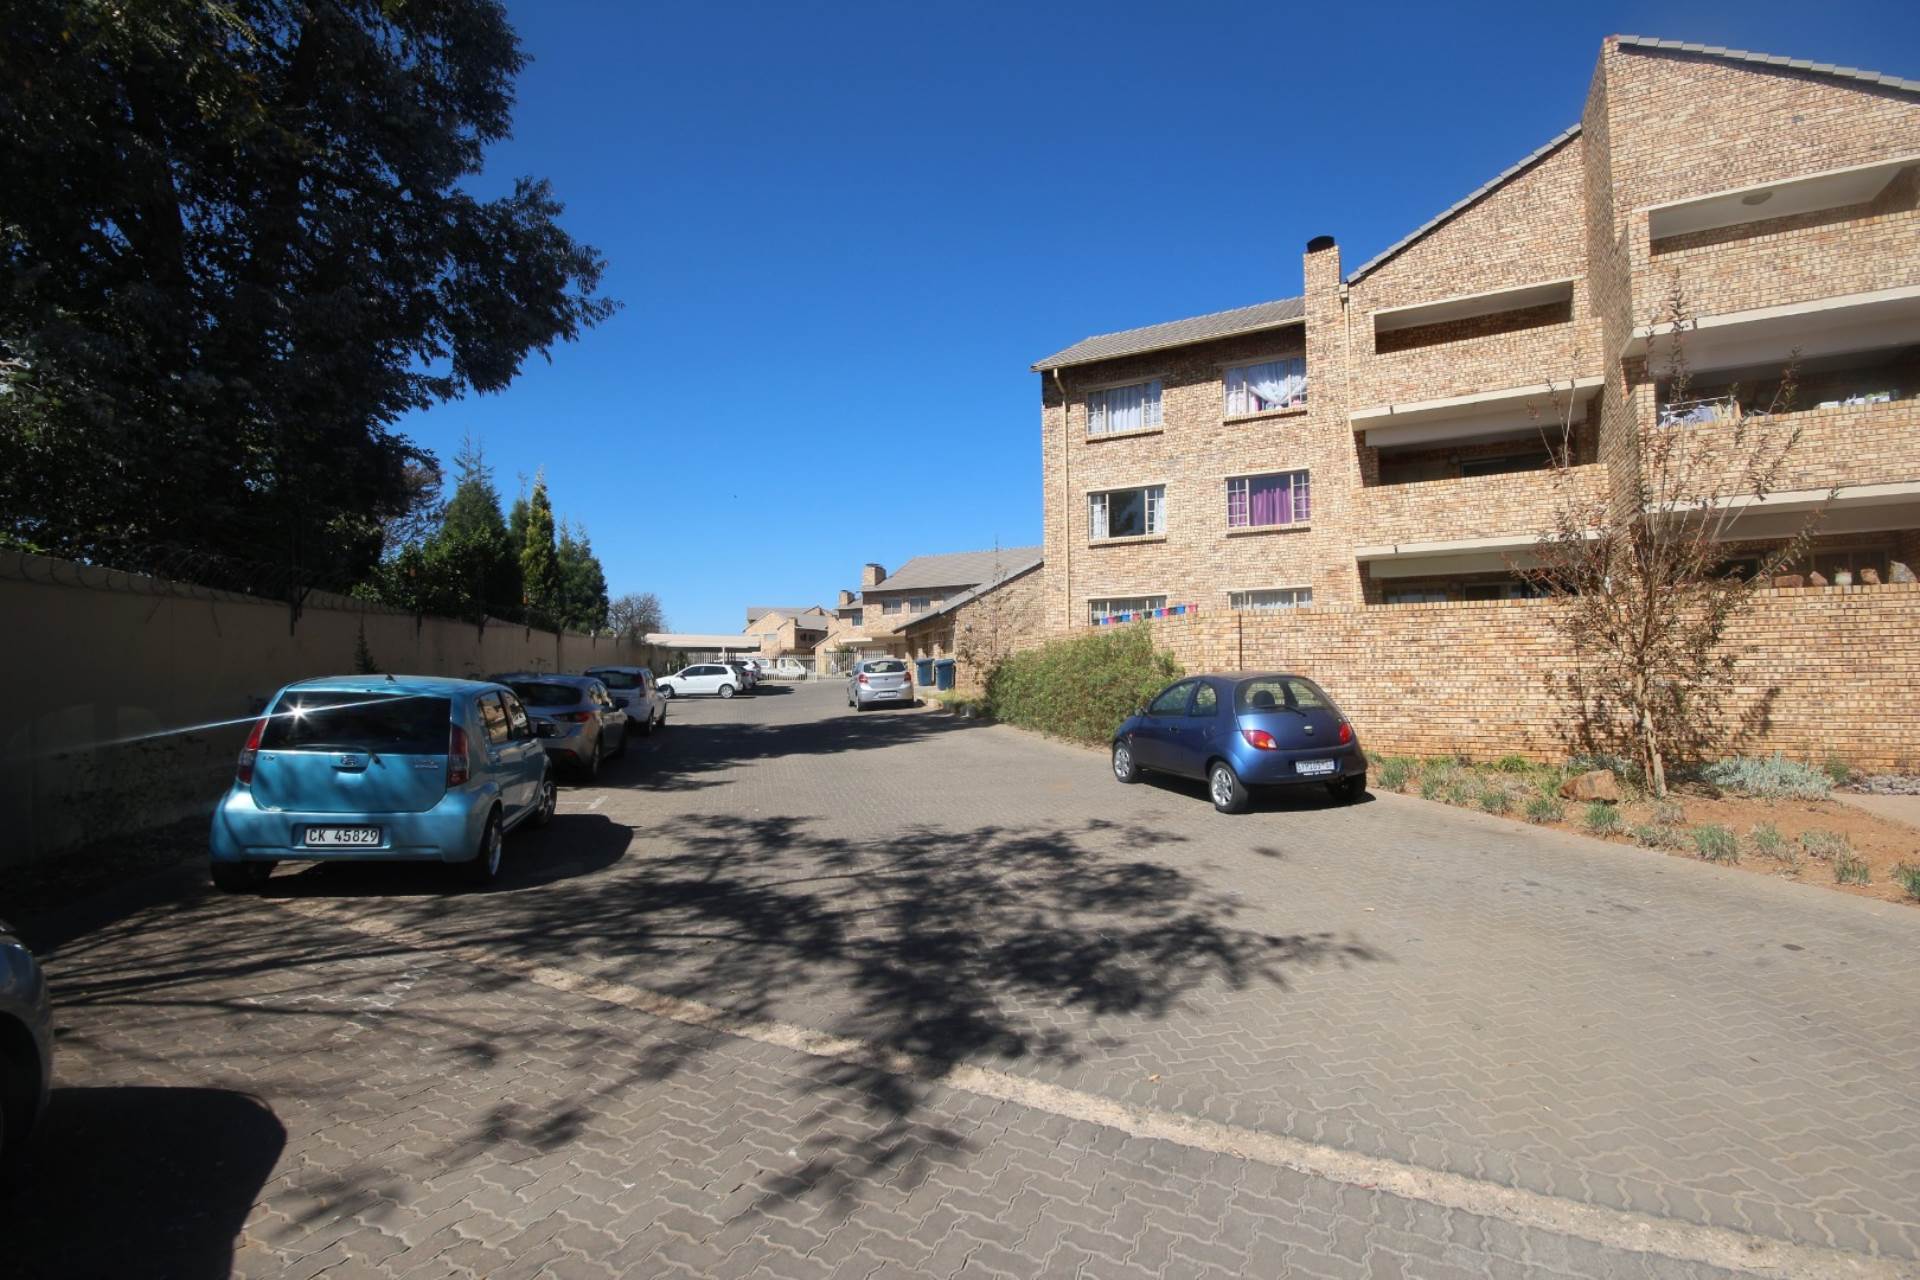 Minimalist Apartments For Sale In Centurion with Simple Decor